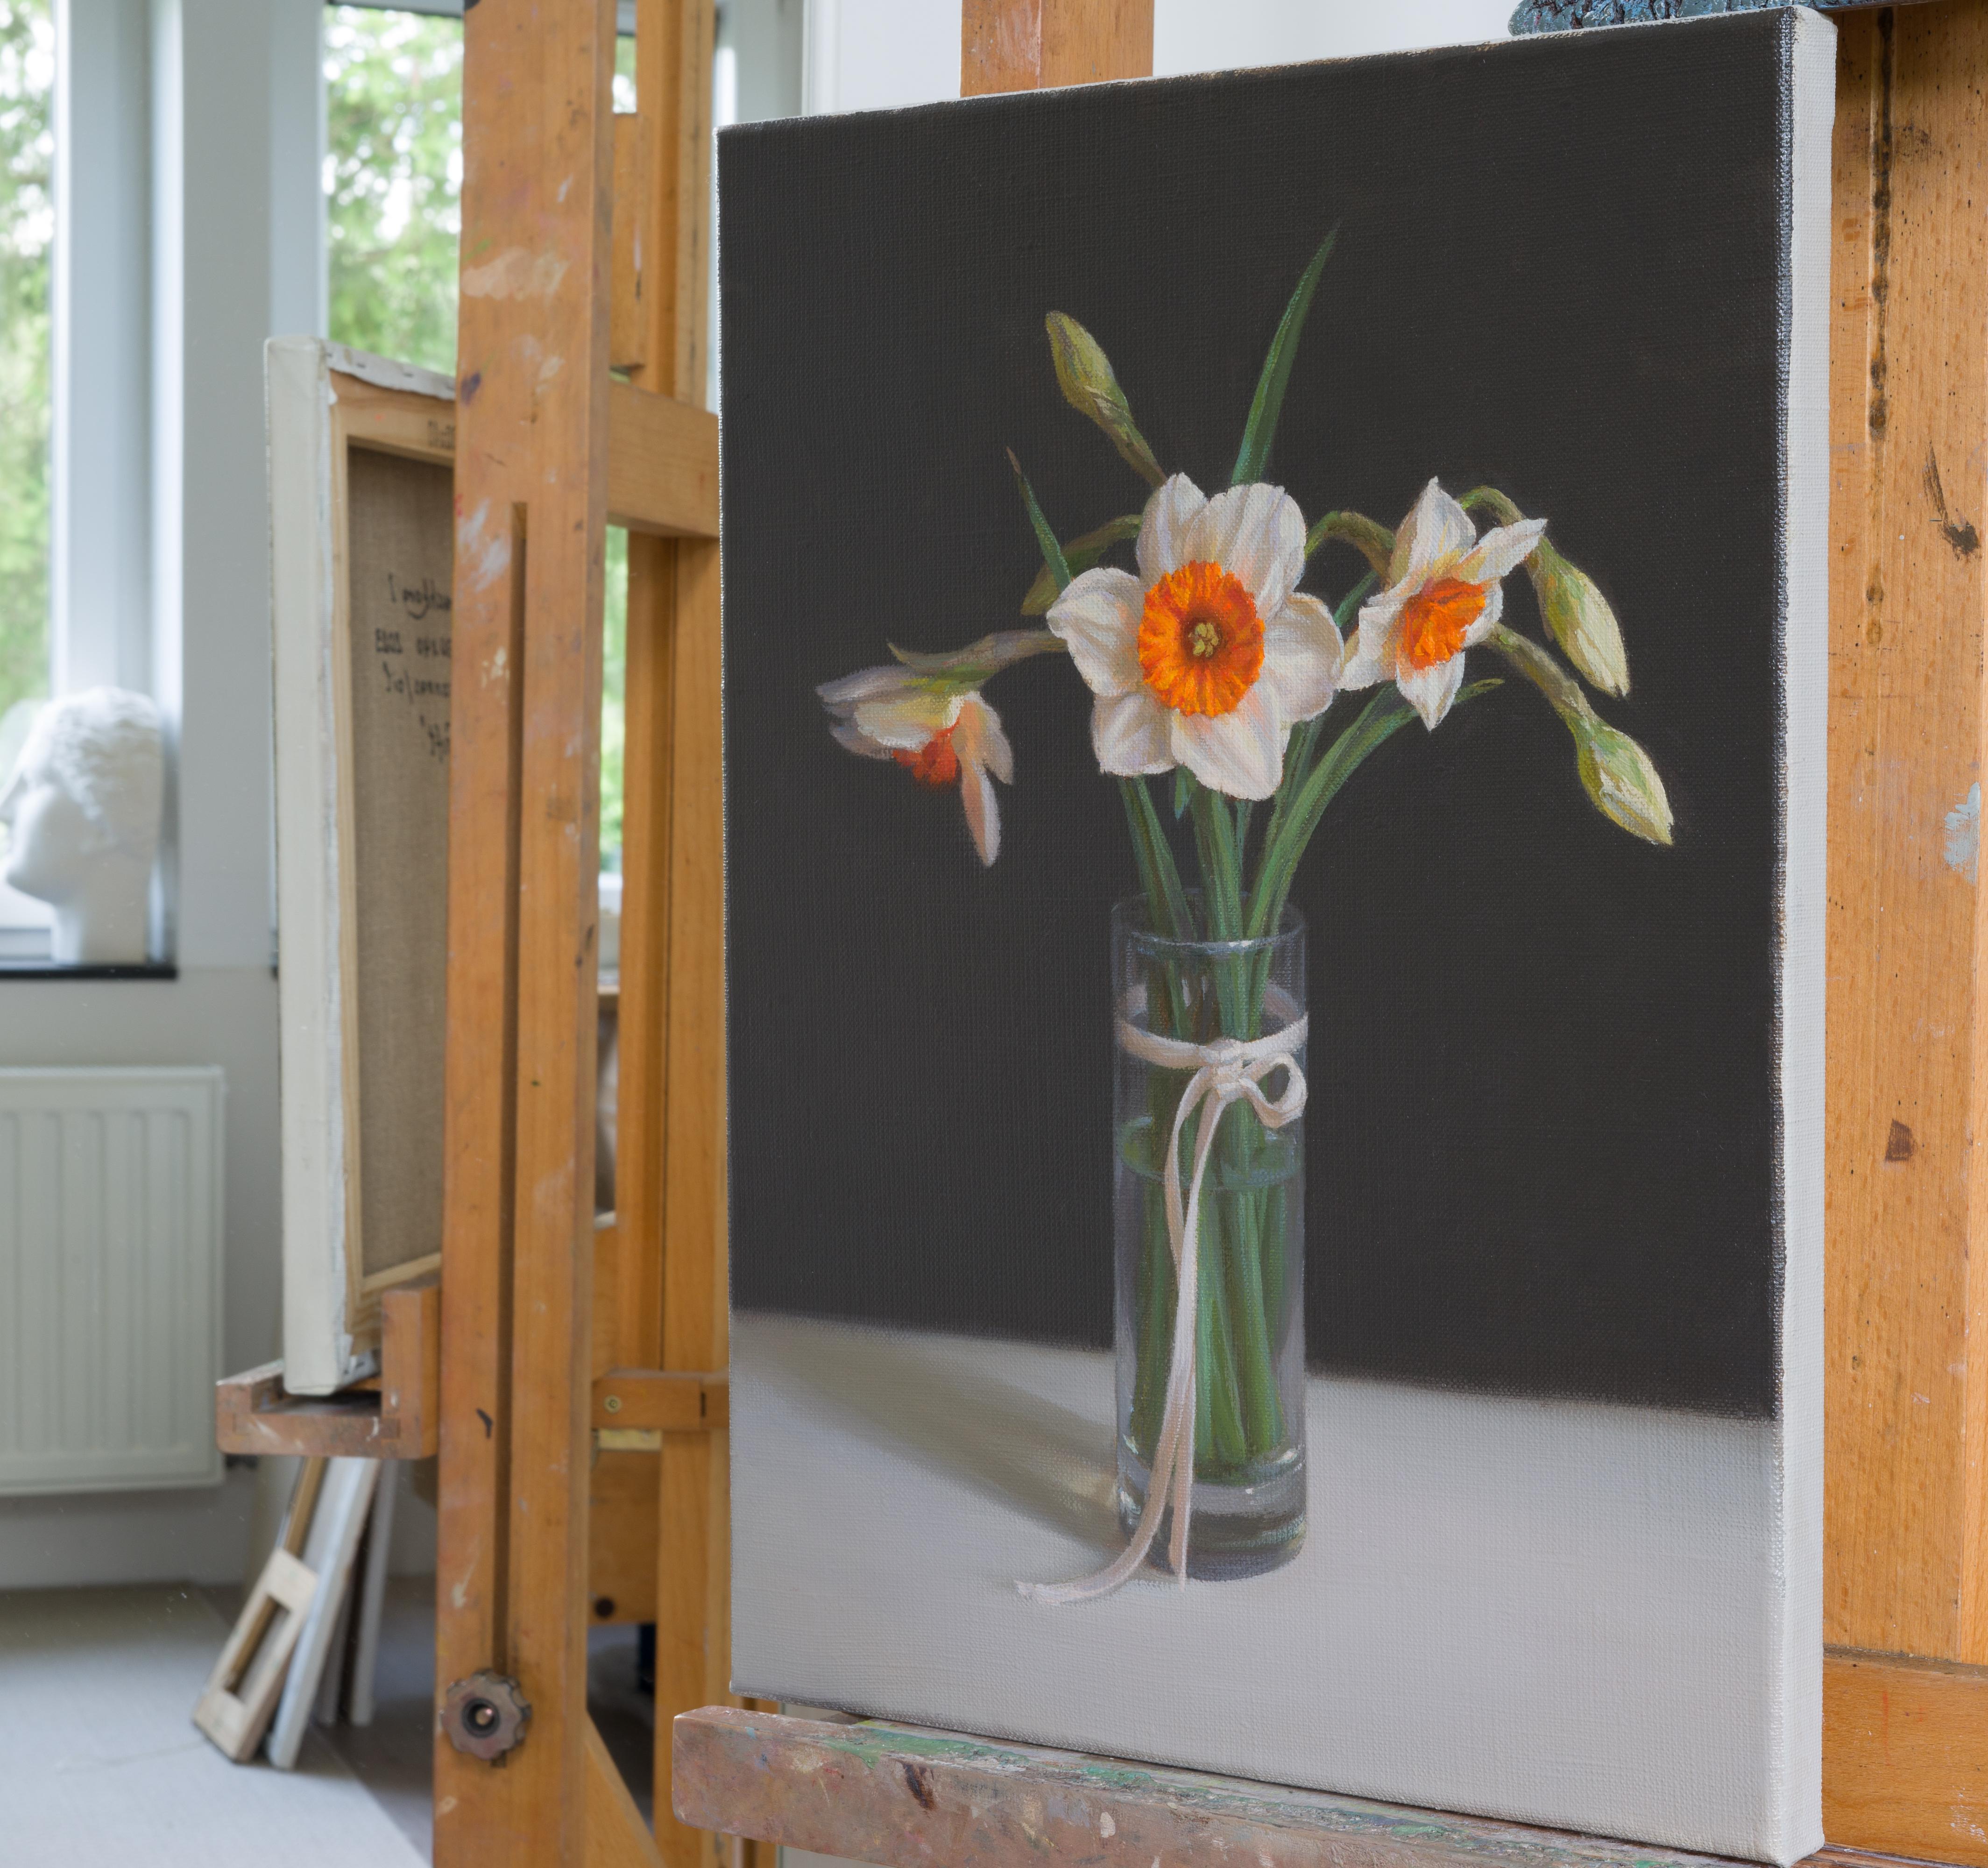 These stunning spring daffodils are placed in a transparent vase and tied with a silk ribbon as a reminder of the gift. A dark background helps to reveal delicate forms of flowers and capture the reactions of light with glass. The painting technique